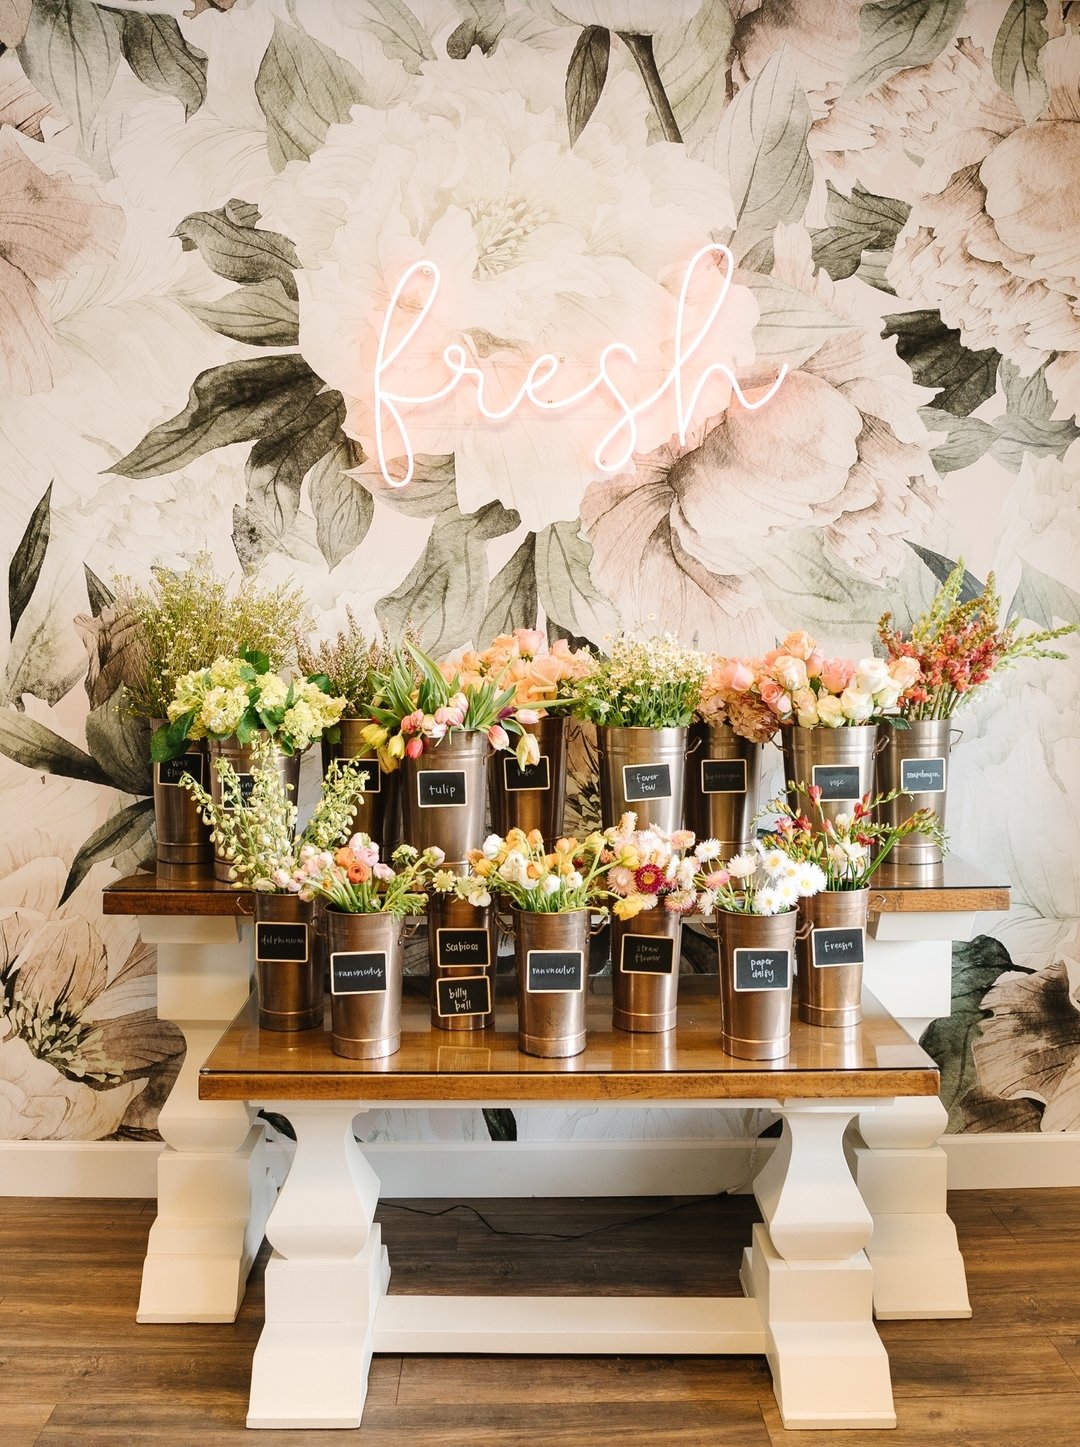 Dads, go ahead and mark your calendars to come shop the bar with your kiddos for Mother&rsquo;s Day on Saturday, May 11th! Your kiddos picking out blooms for mom is one of our favorite moments of the year!